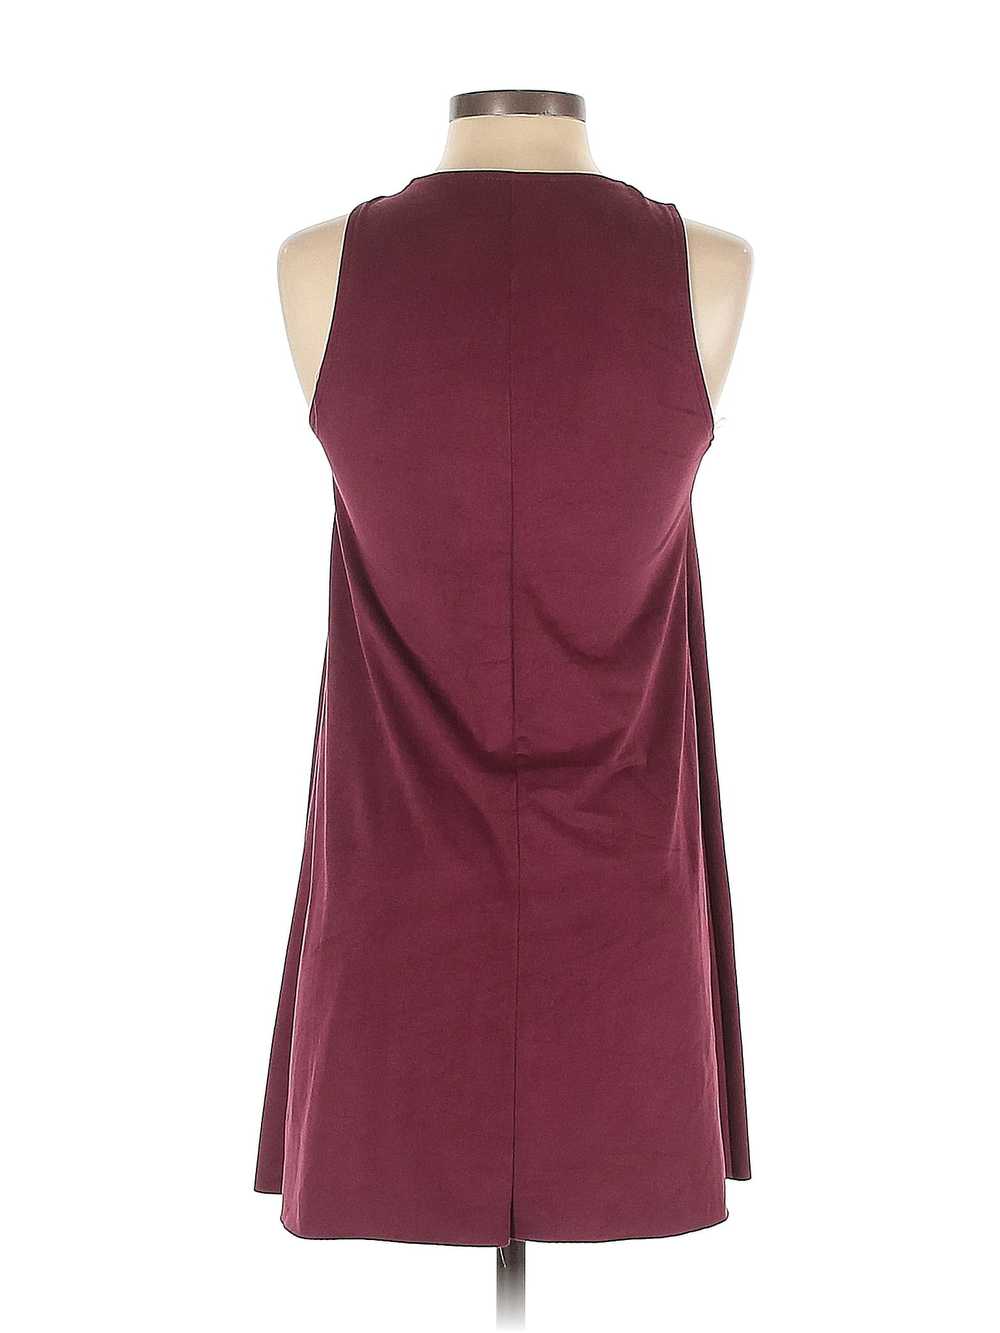 Mod Ref Women Red Casual Dress S - image 2